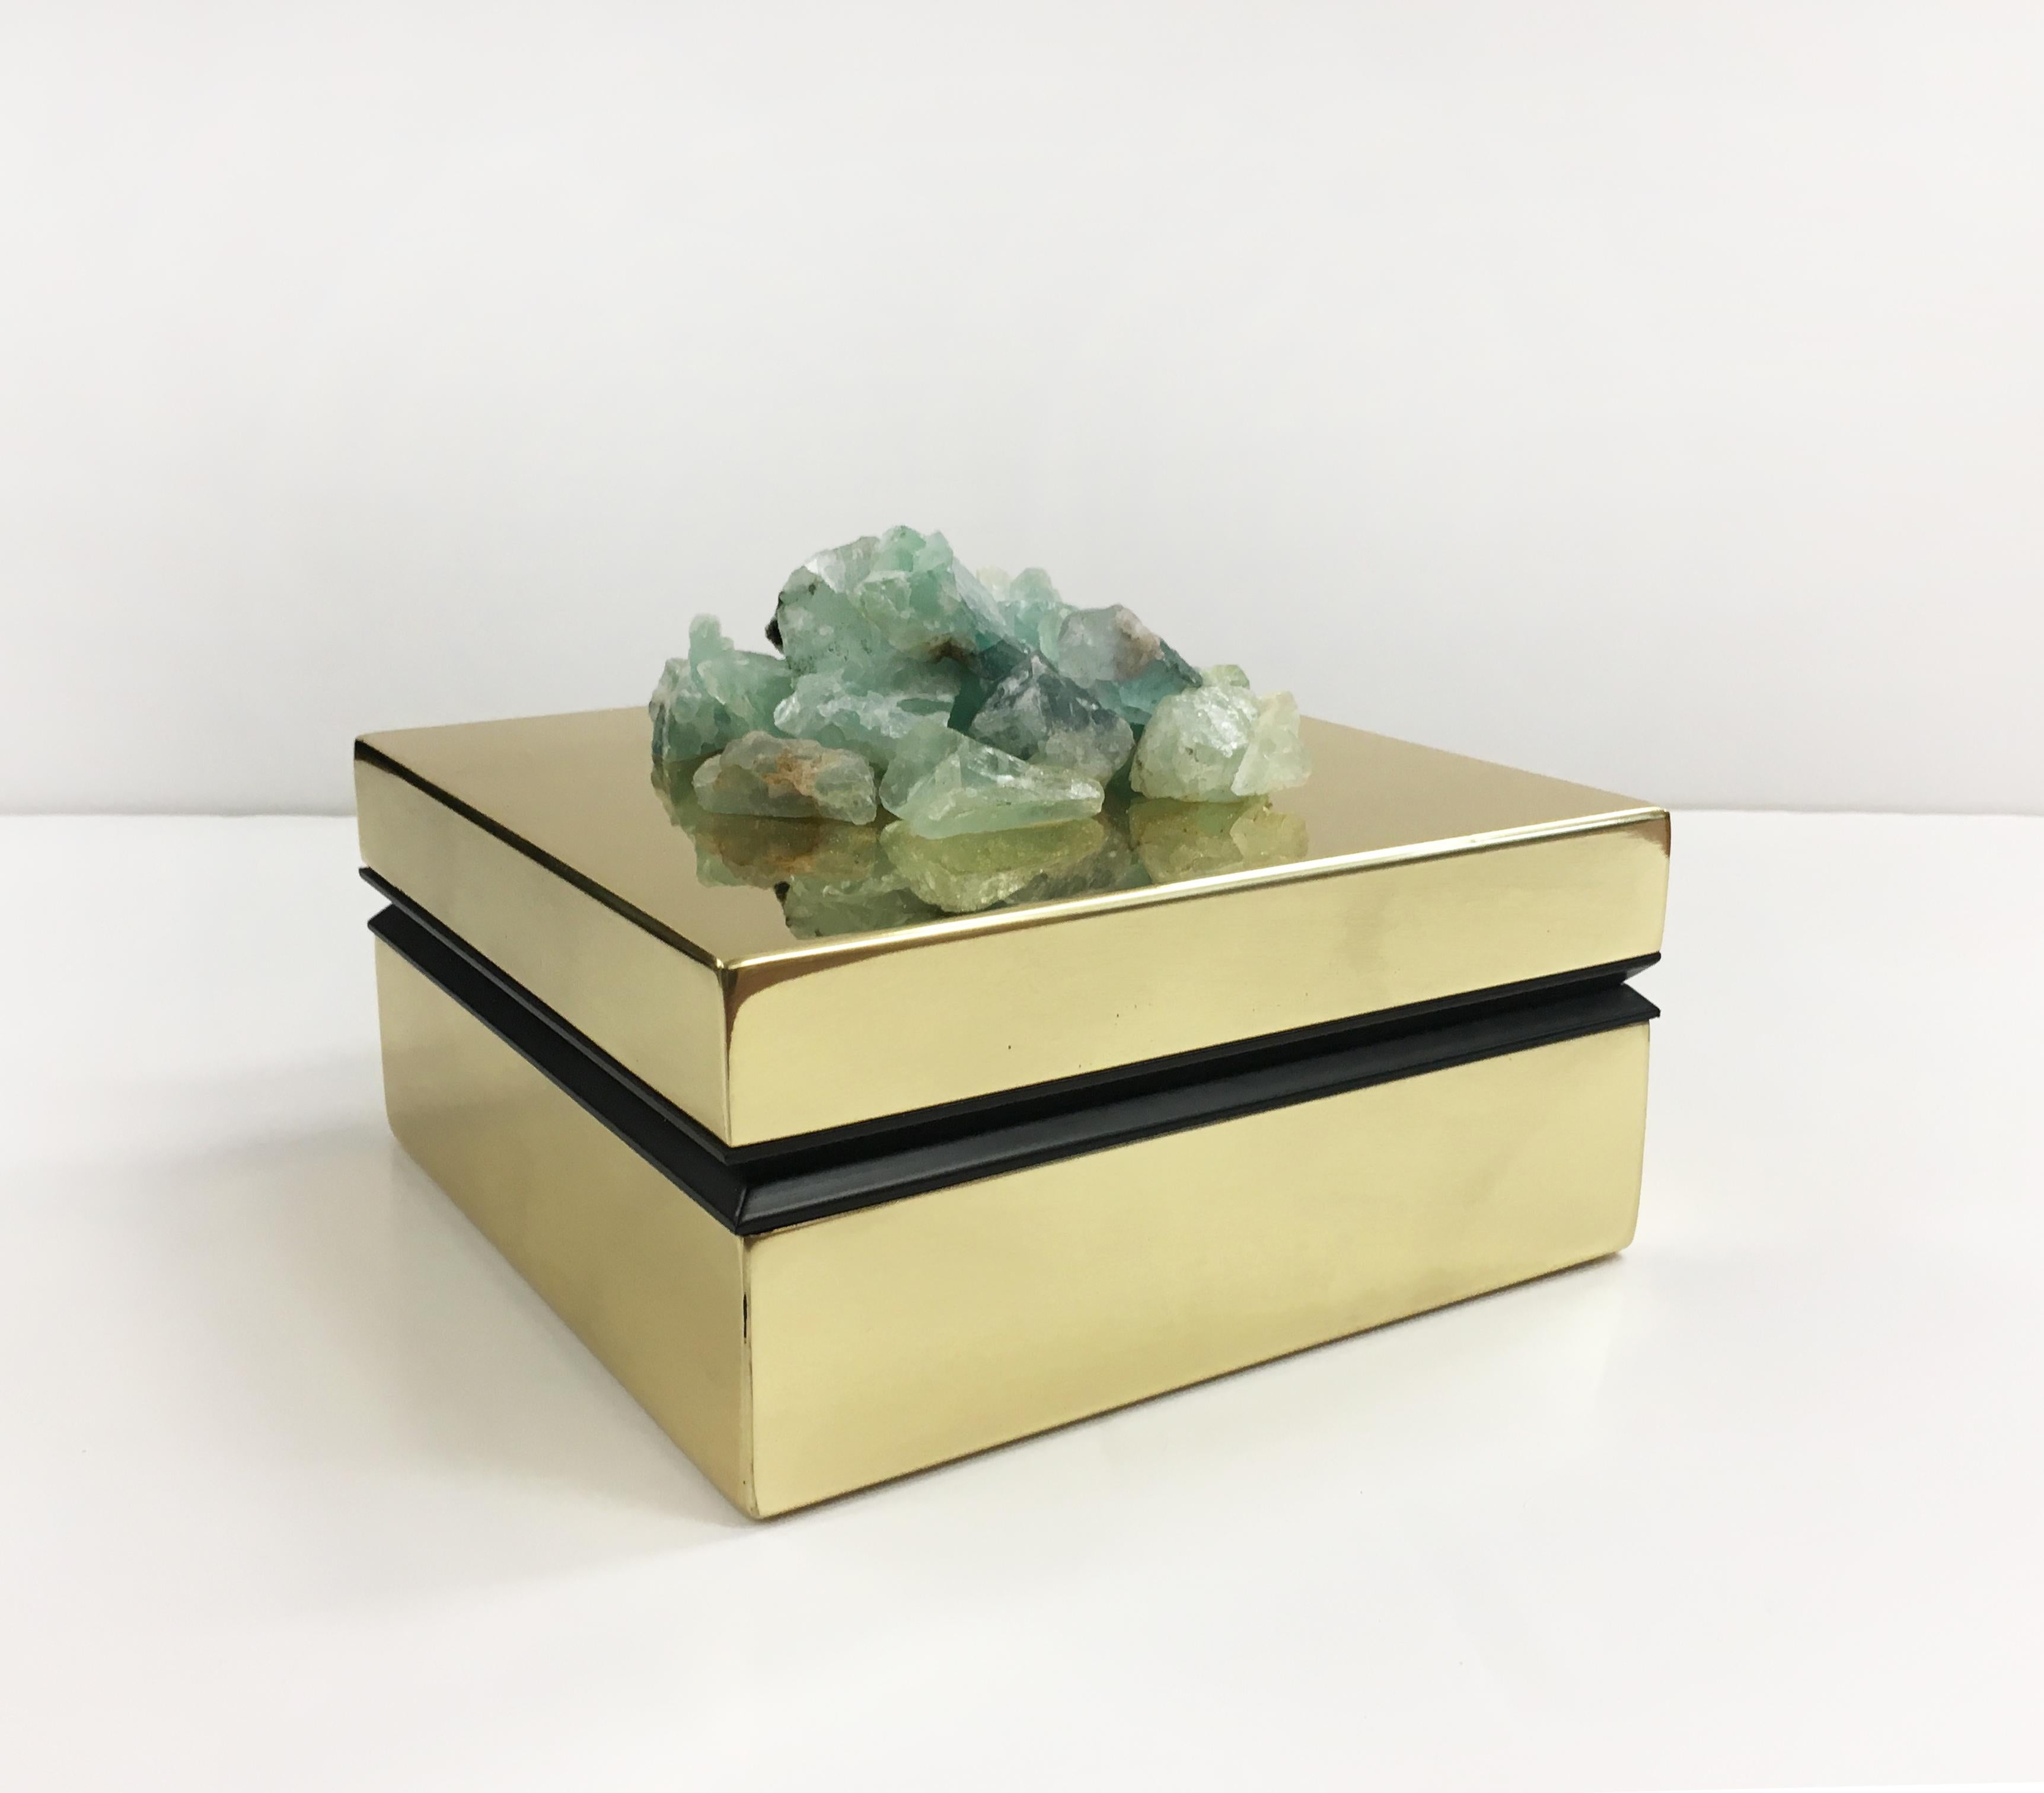 Stunning brass jewel box by Umberto Cinelli, Italy, 2018. 

This awesome piece is handcrafted by our Italian artisans and each is one-of-a-kind due to the natural semi-precious stones and minerals used. 
A statement piece that will enhance every